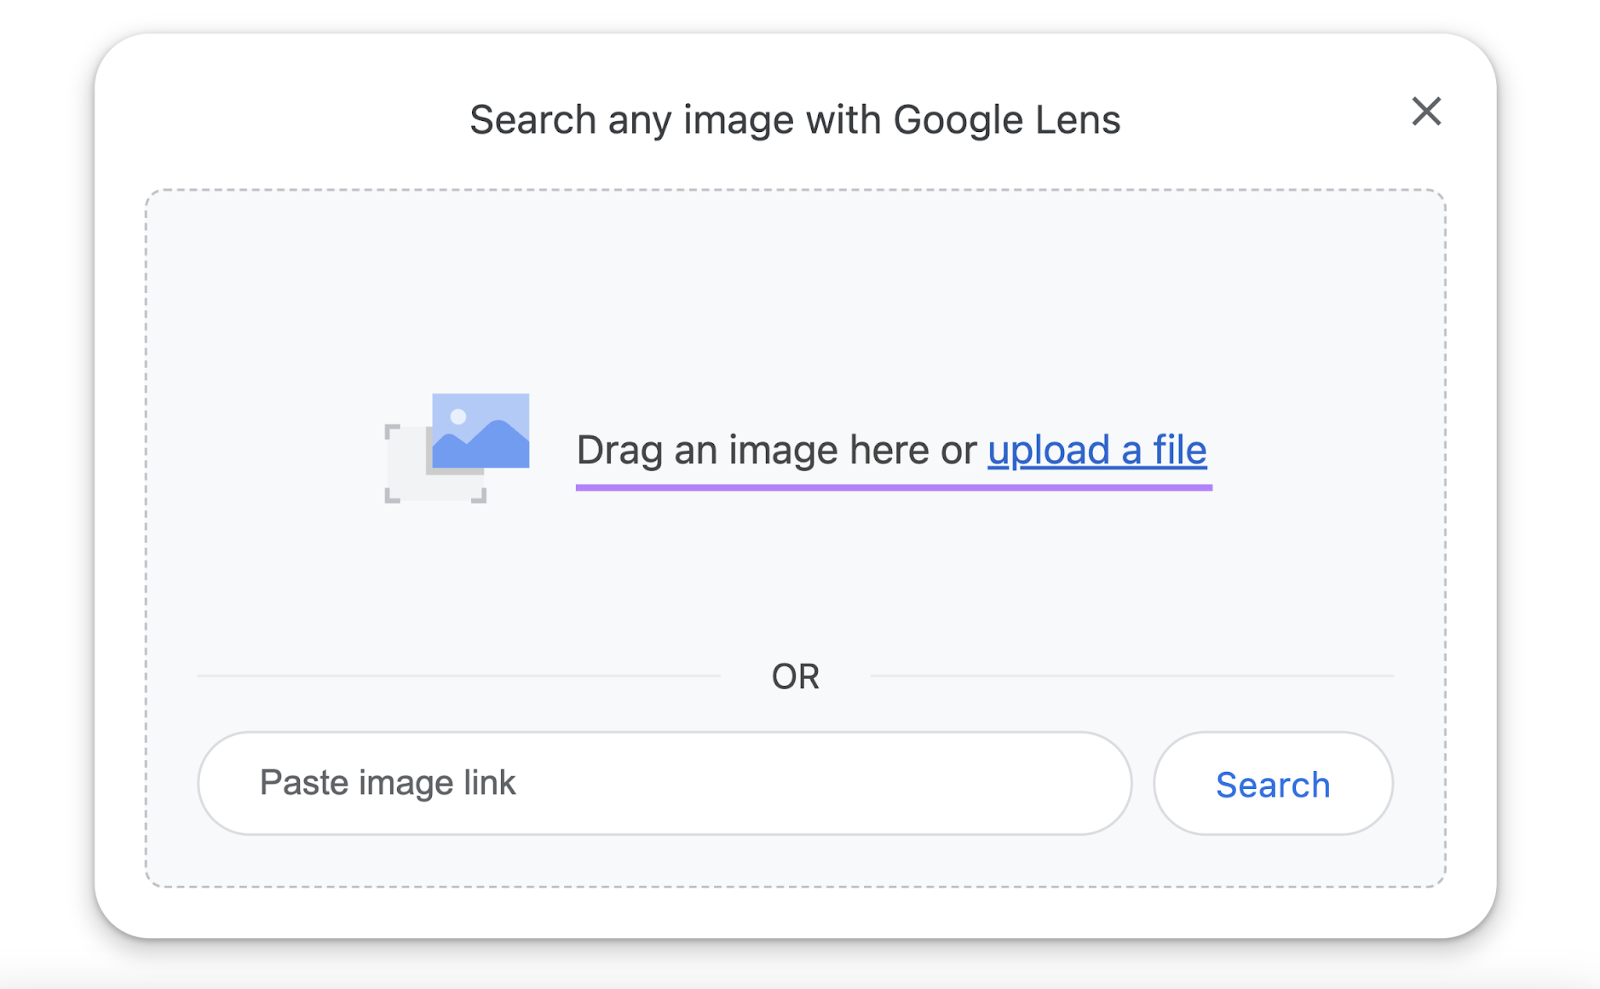 upload the image to Google from file directory